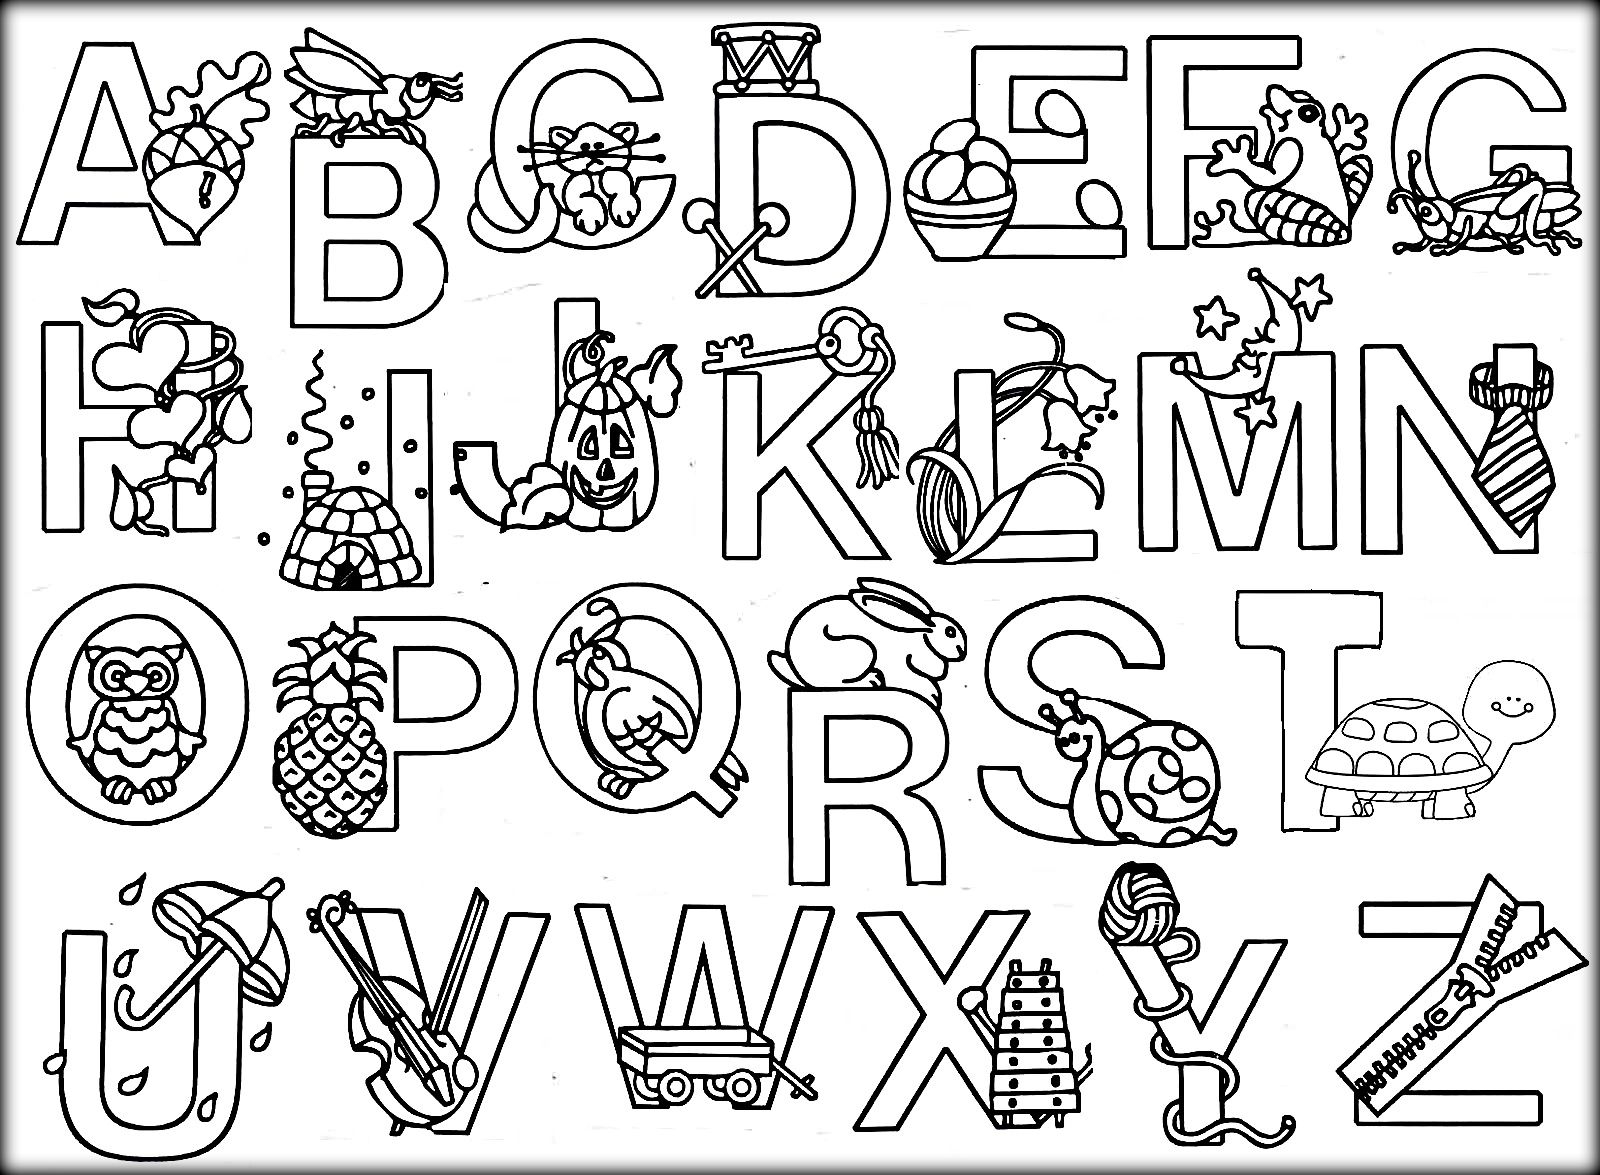 Colorful-wonderful alphabet knowledge coloring page